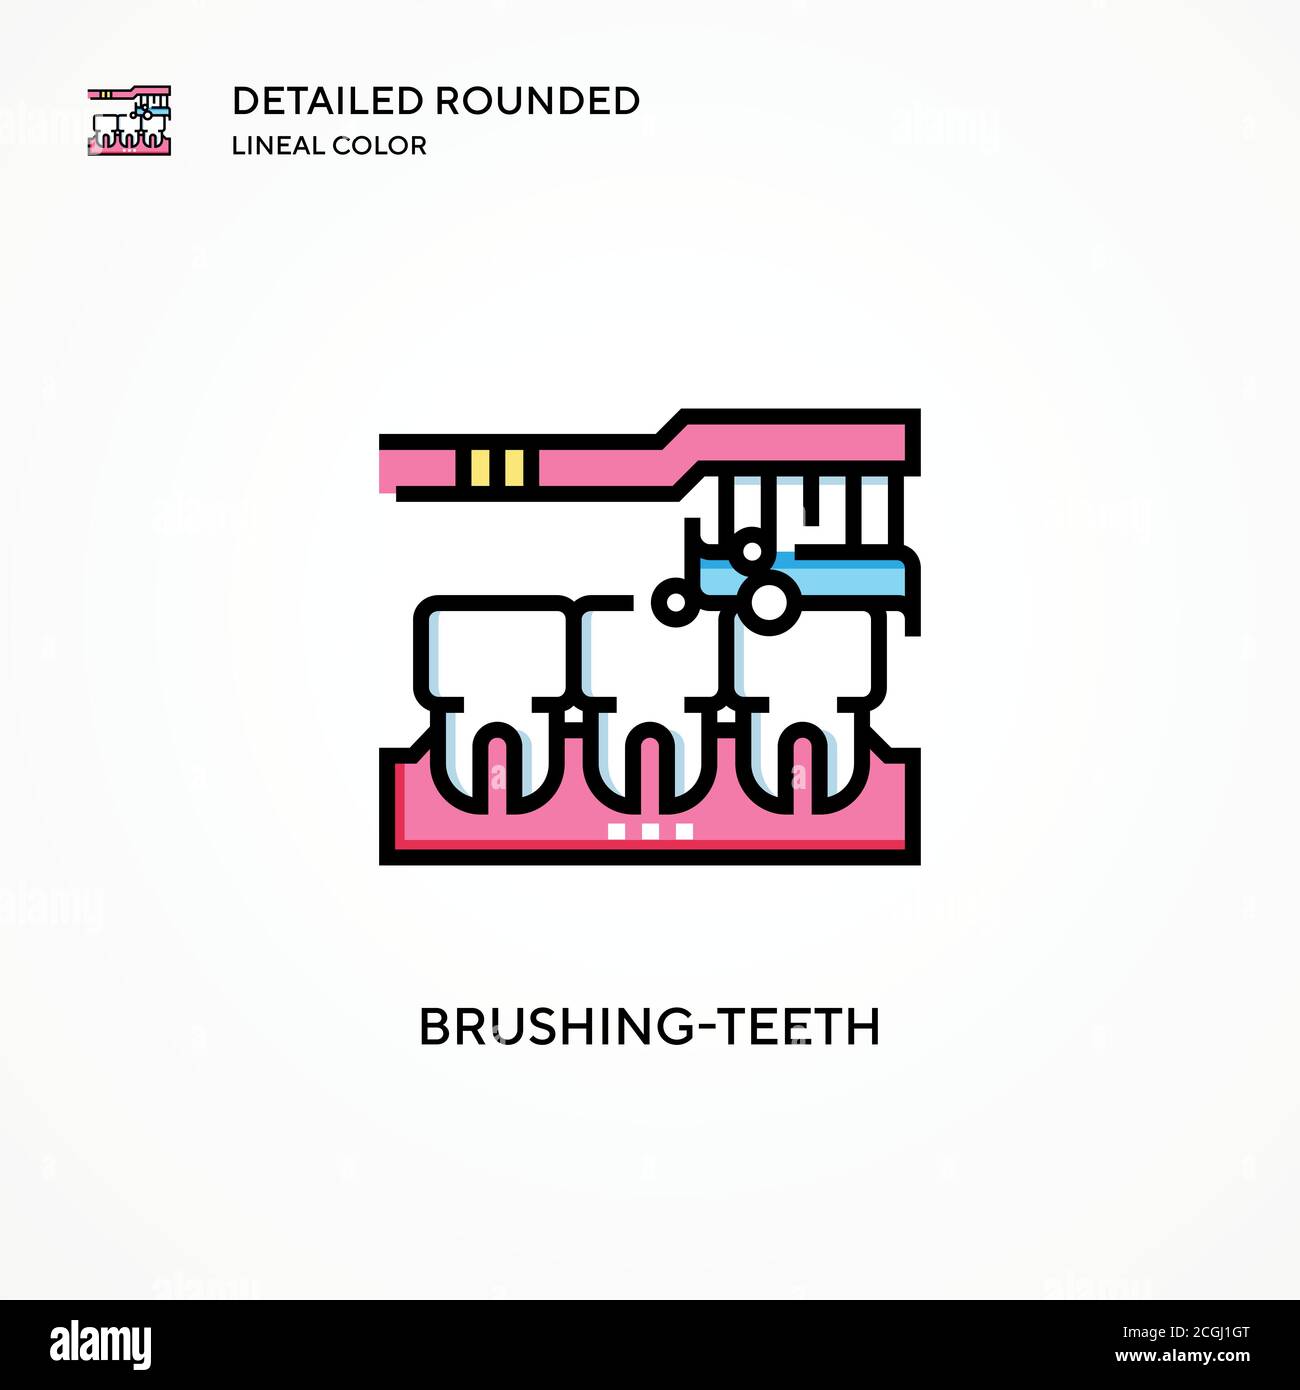 Brushing-teeth vector icon. Modern vector illustration concepts. Easy to edit and customize. Stock Vector